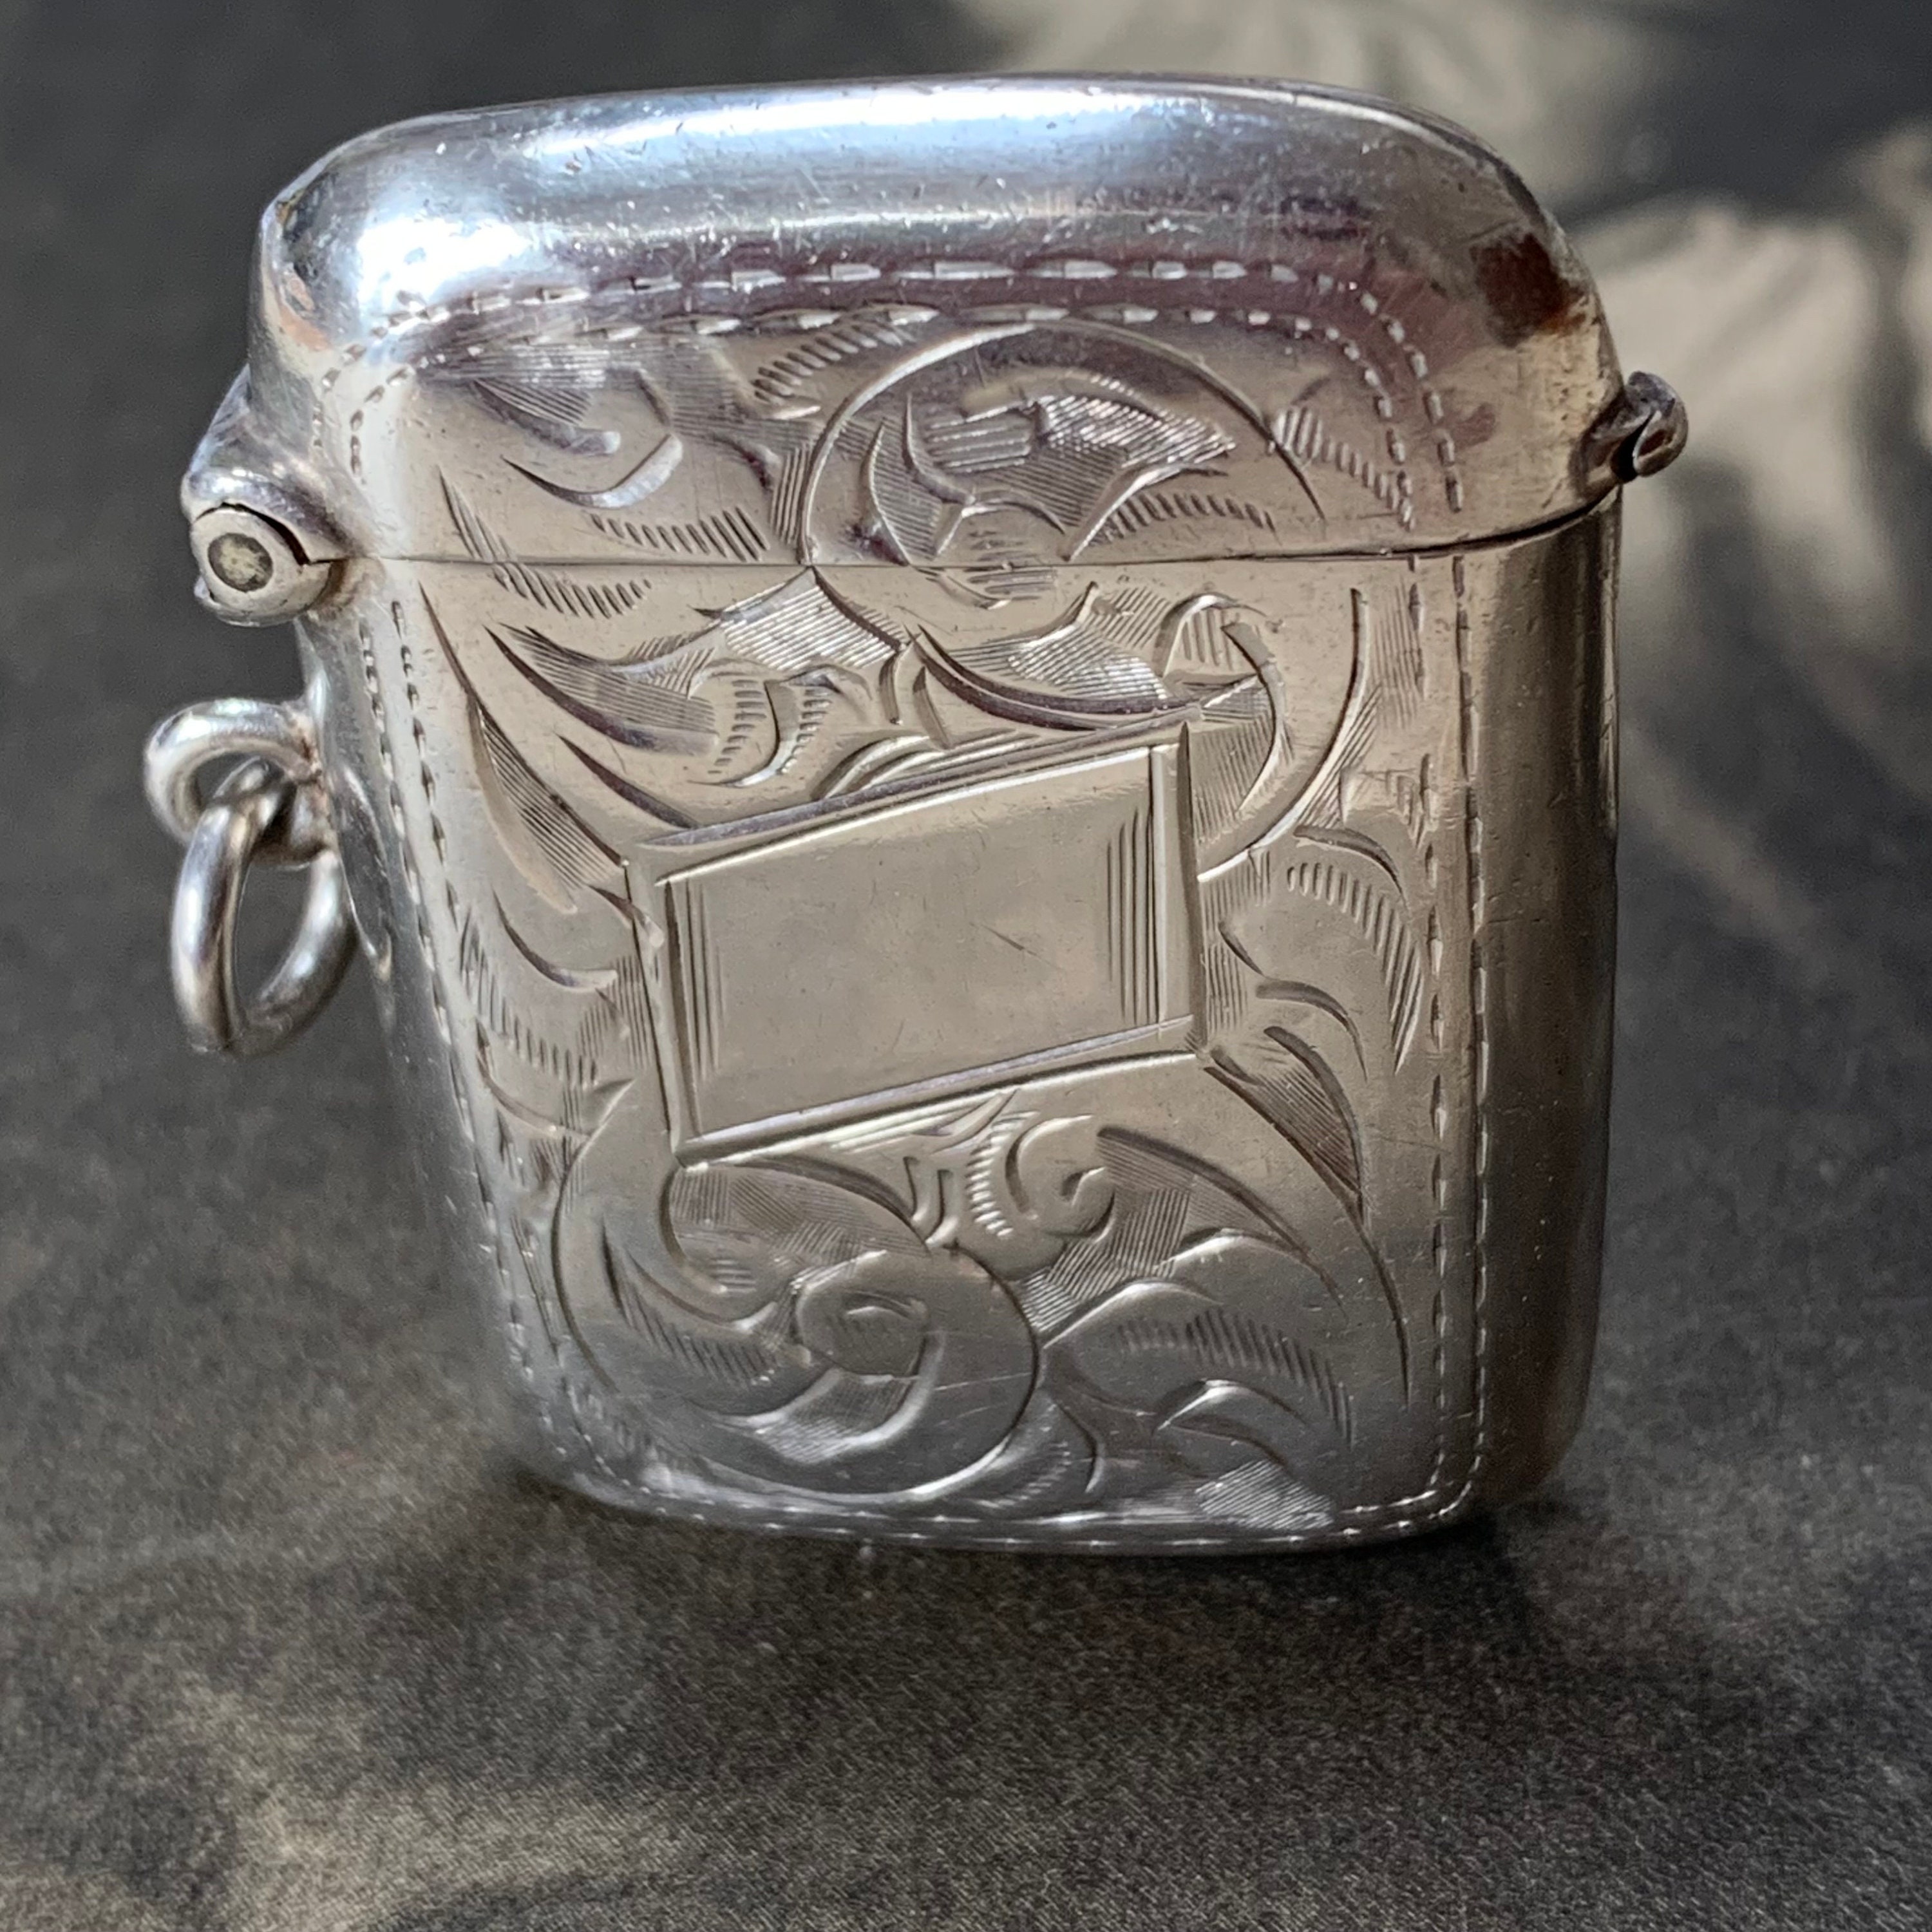 Art Deco Sterling Silver Vesta Locket With Forget Me Not Engravings. A Special & Beautiful Keepsake Pendant That Dates From 1925